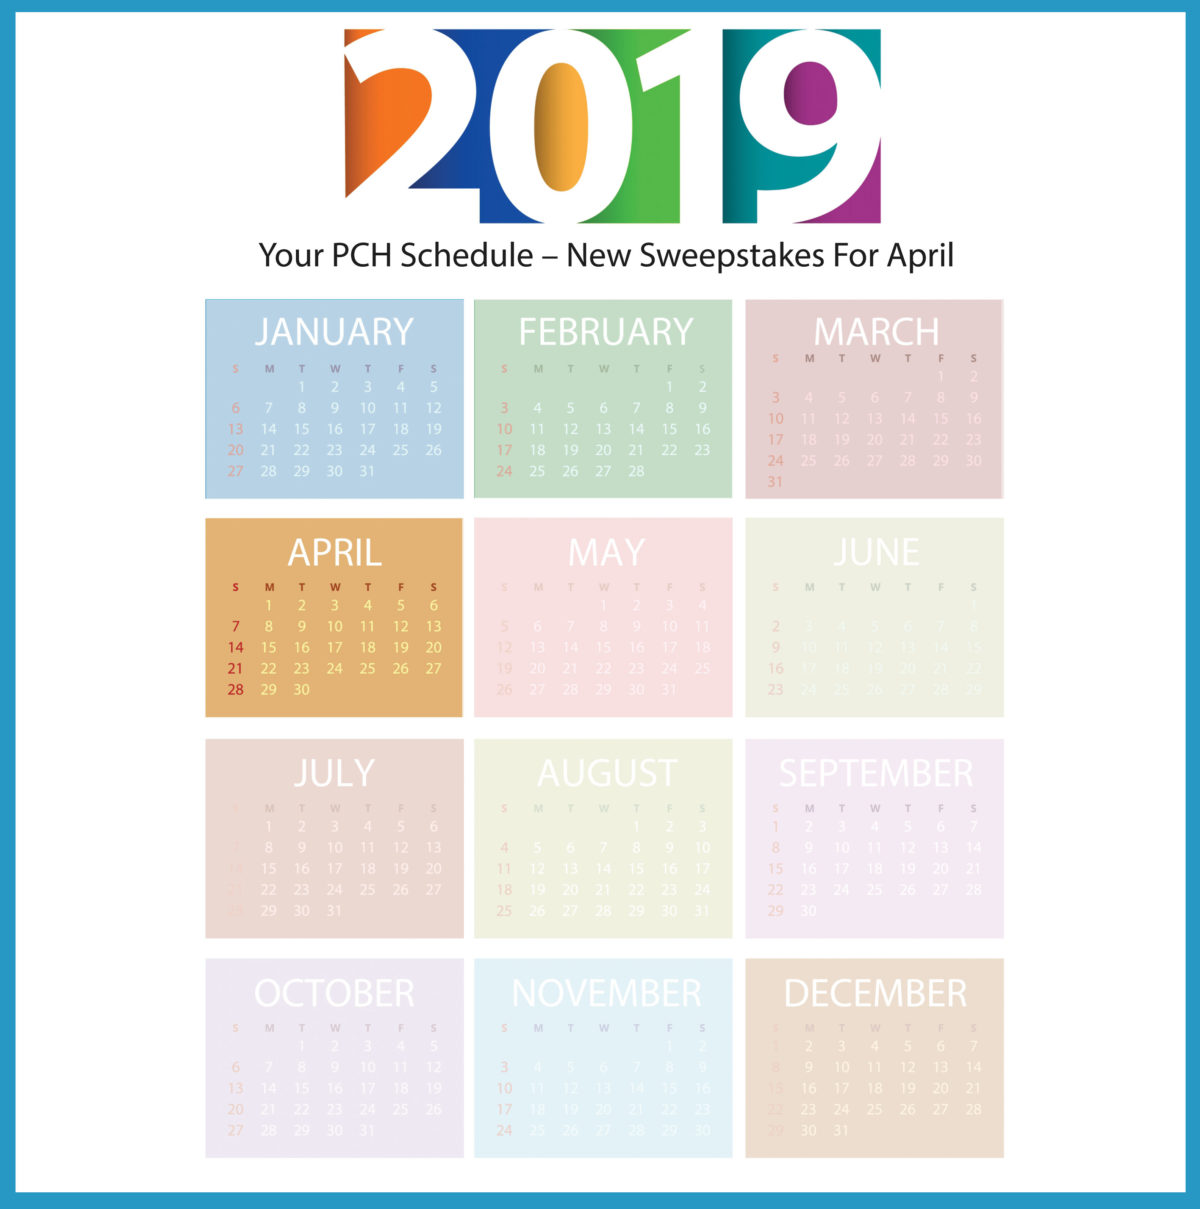 Your PCH Schedule – New Sweepstakes For April